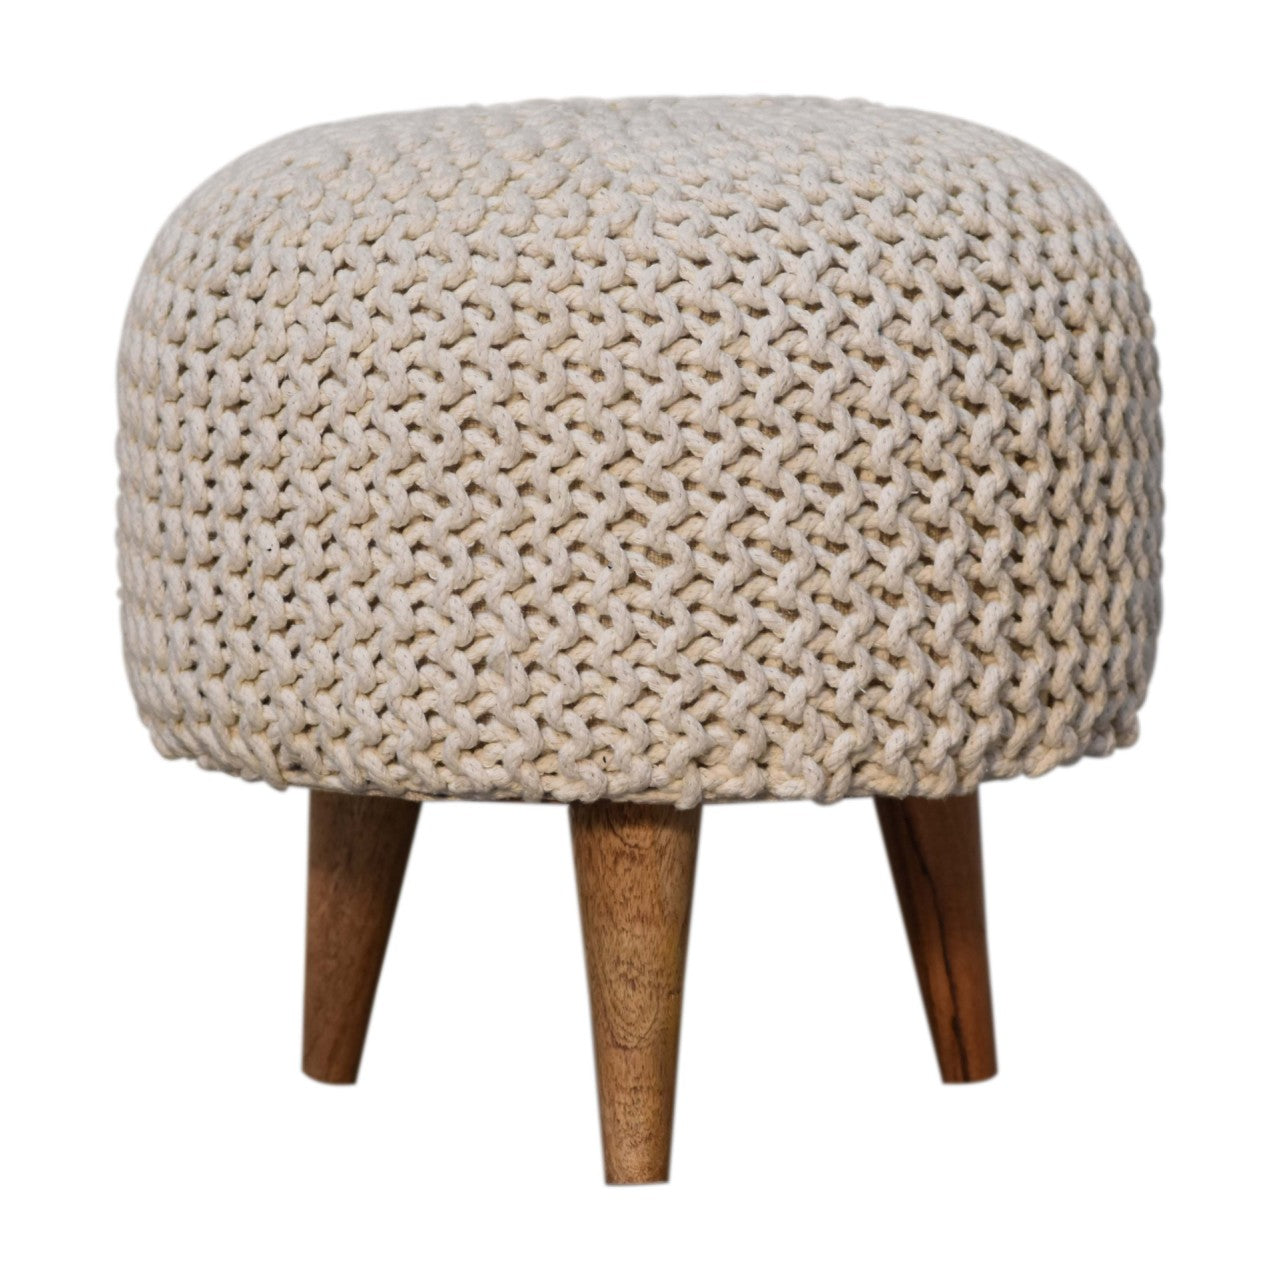 View Keeva White Round Footstool information